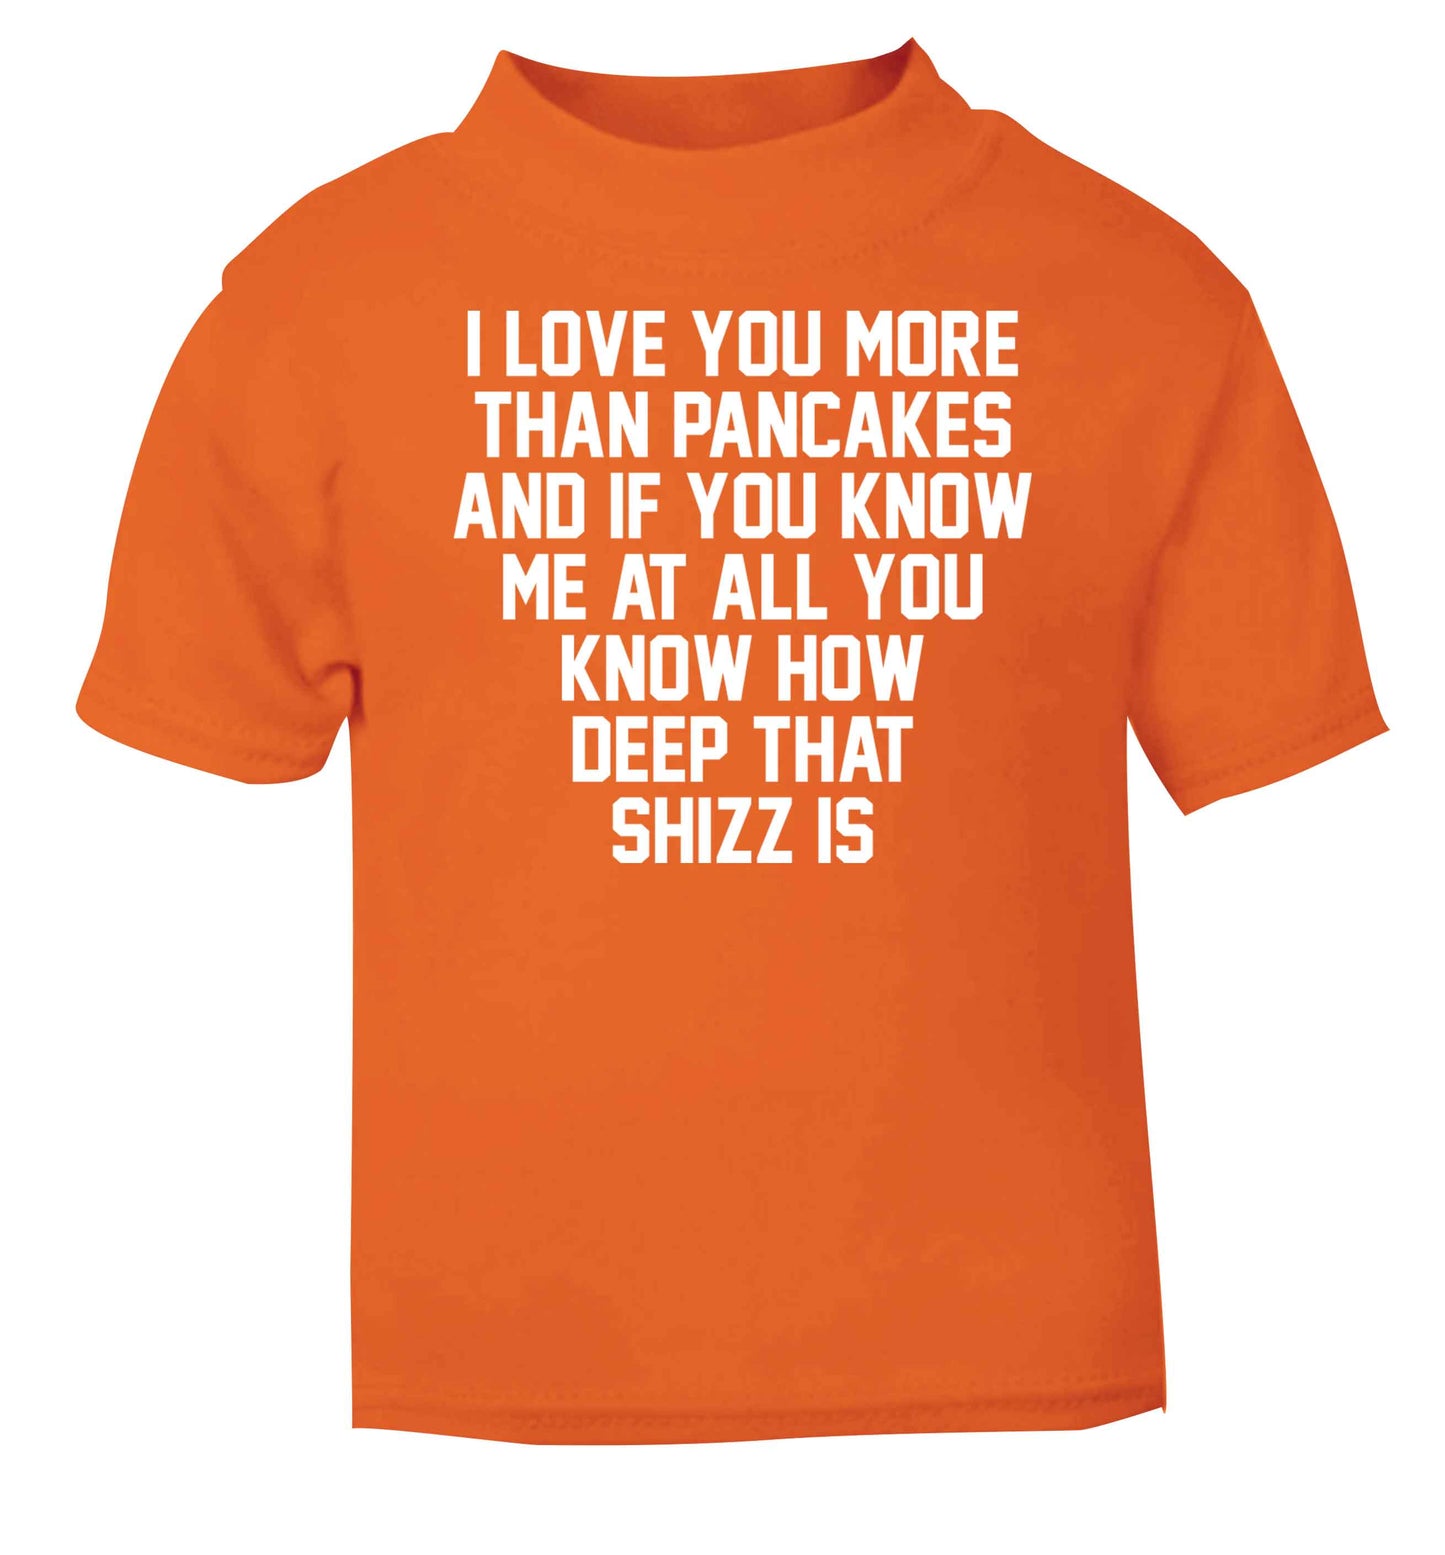 I love you more than pancakes and if you know me at all you know how deep that shizz is orange baby toddler Tshirt 2 Years